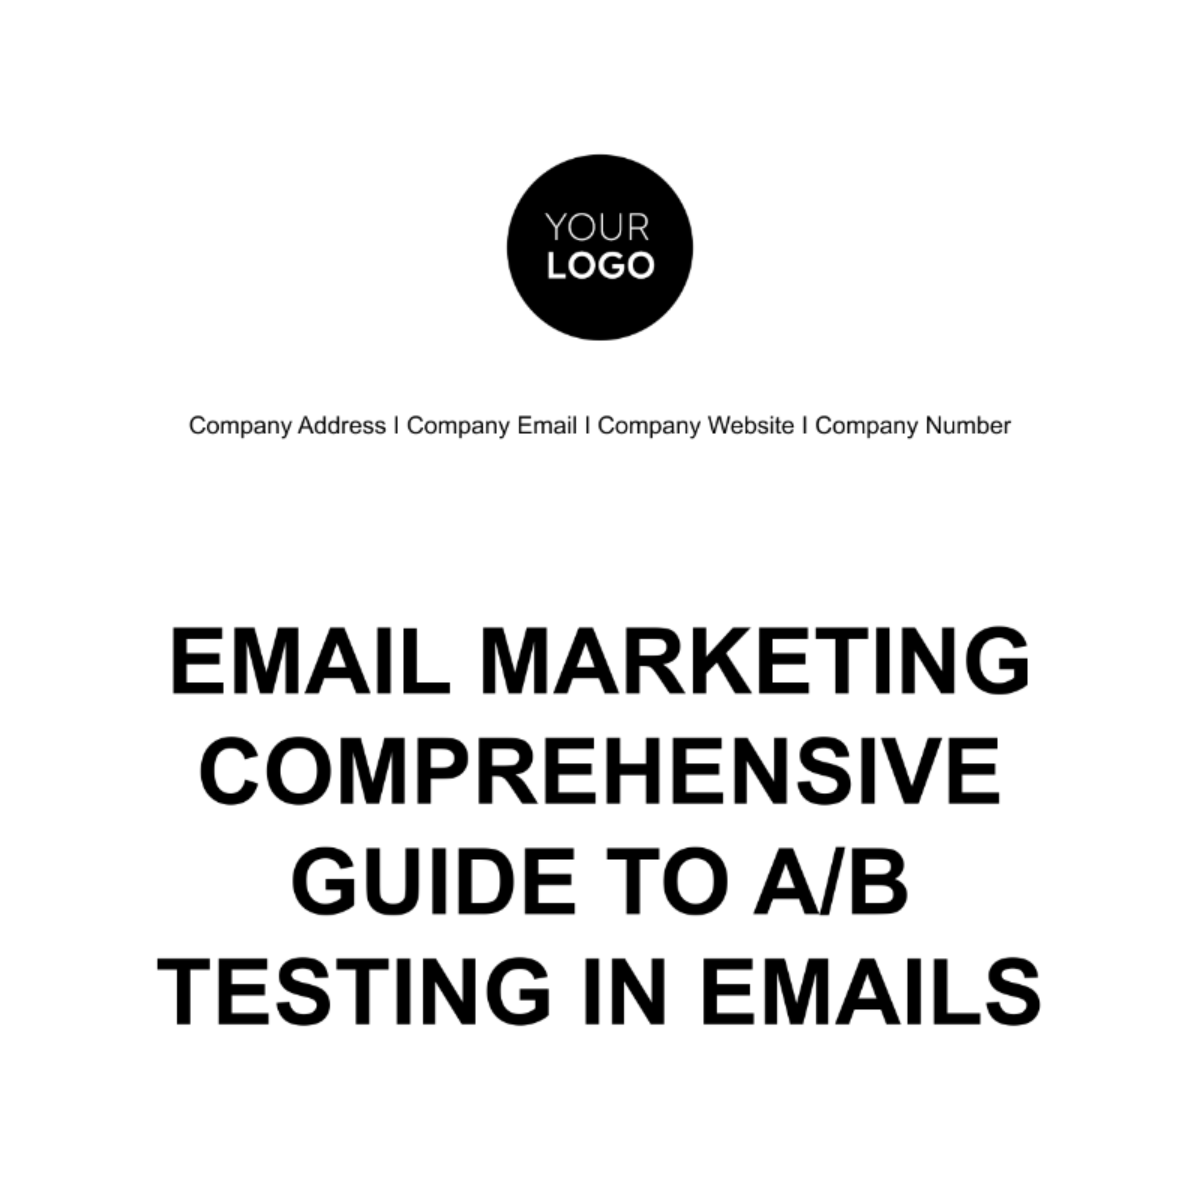 Free Email Marketing Comprehensive Guide to A/B Testing in Emails Template